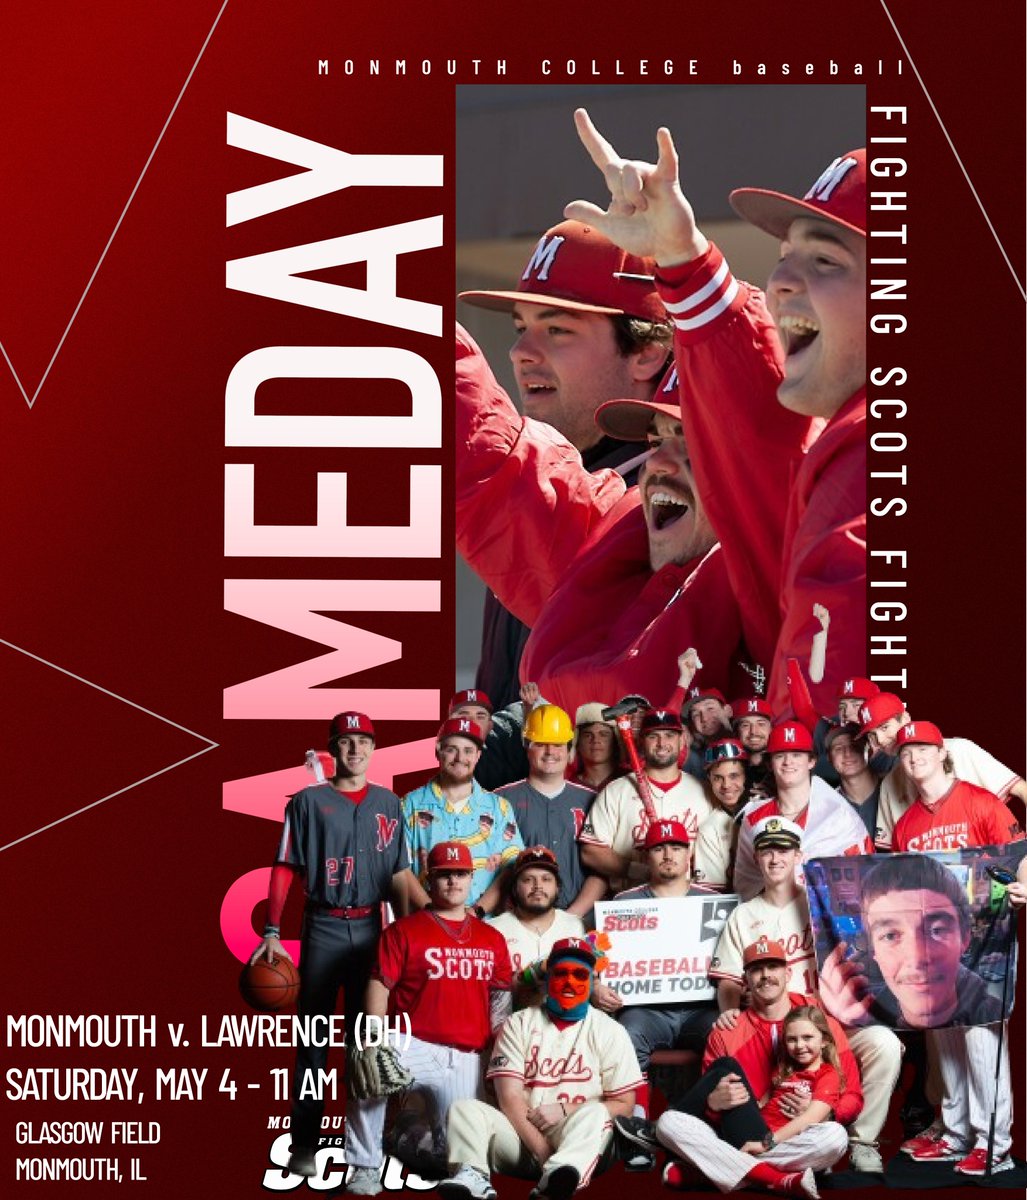 Time change for today's @MCScotsBaseball DH as Monmouth hosts Lawrence at 11 am in the final regular season weekend. #RollScots 📍Monmouth 🏟️ Glasgow Field 🆚 Lawrence ⏰ 11am DH 📺monmouthscots.com/showcase?Live=… 📊 monmouthscots.com/sidearmstats/b… 🗞️ @MonmouthGameday